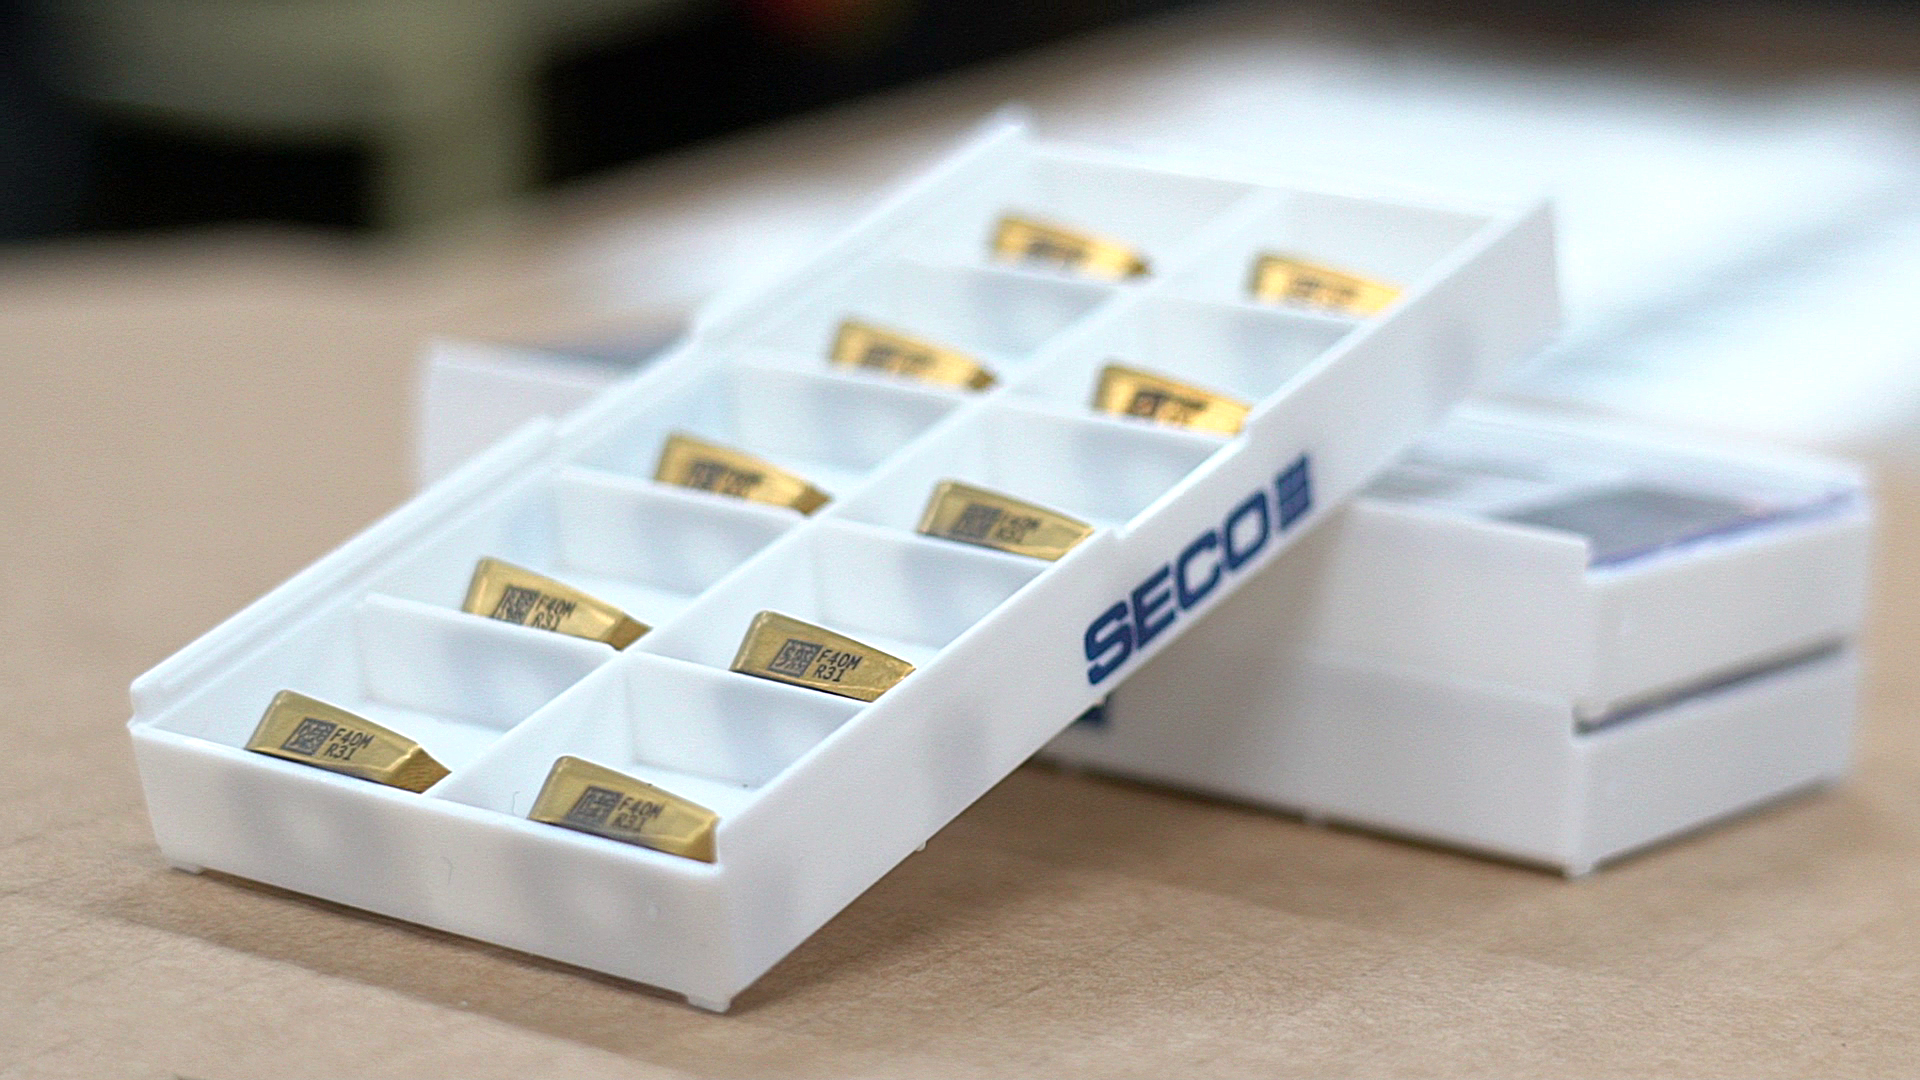 Box with Seco inserts with data matrix codes (photo)